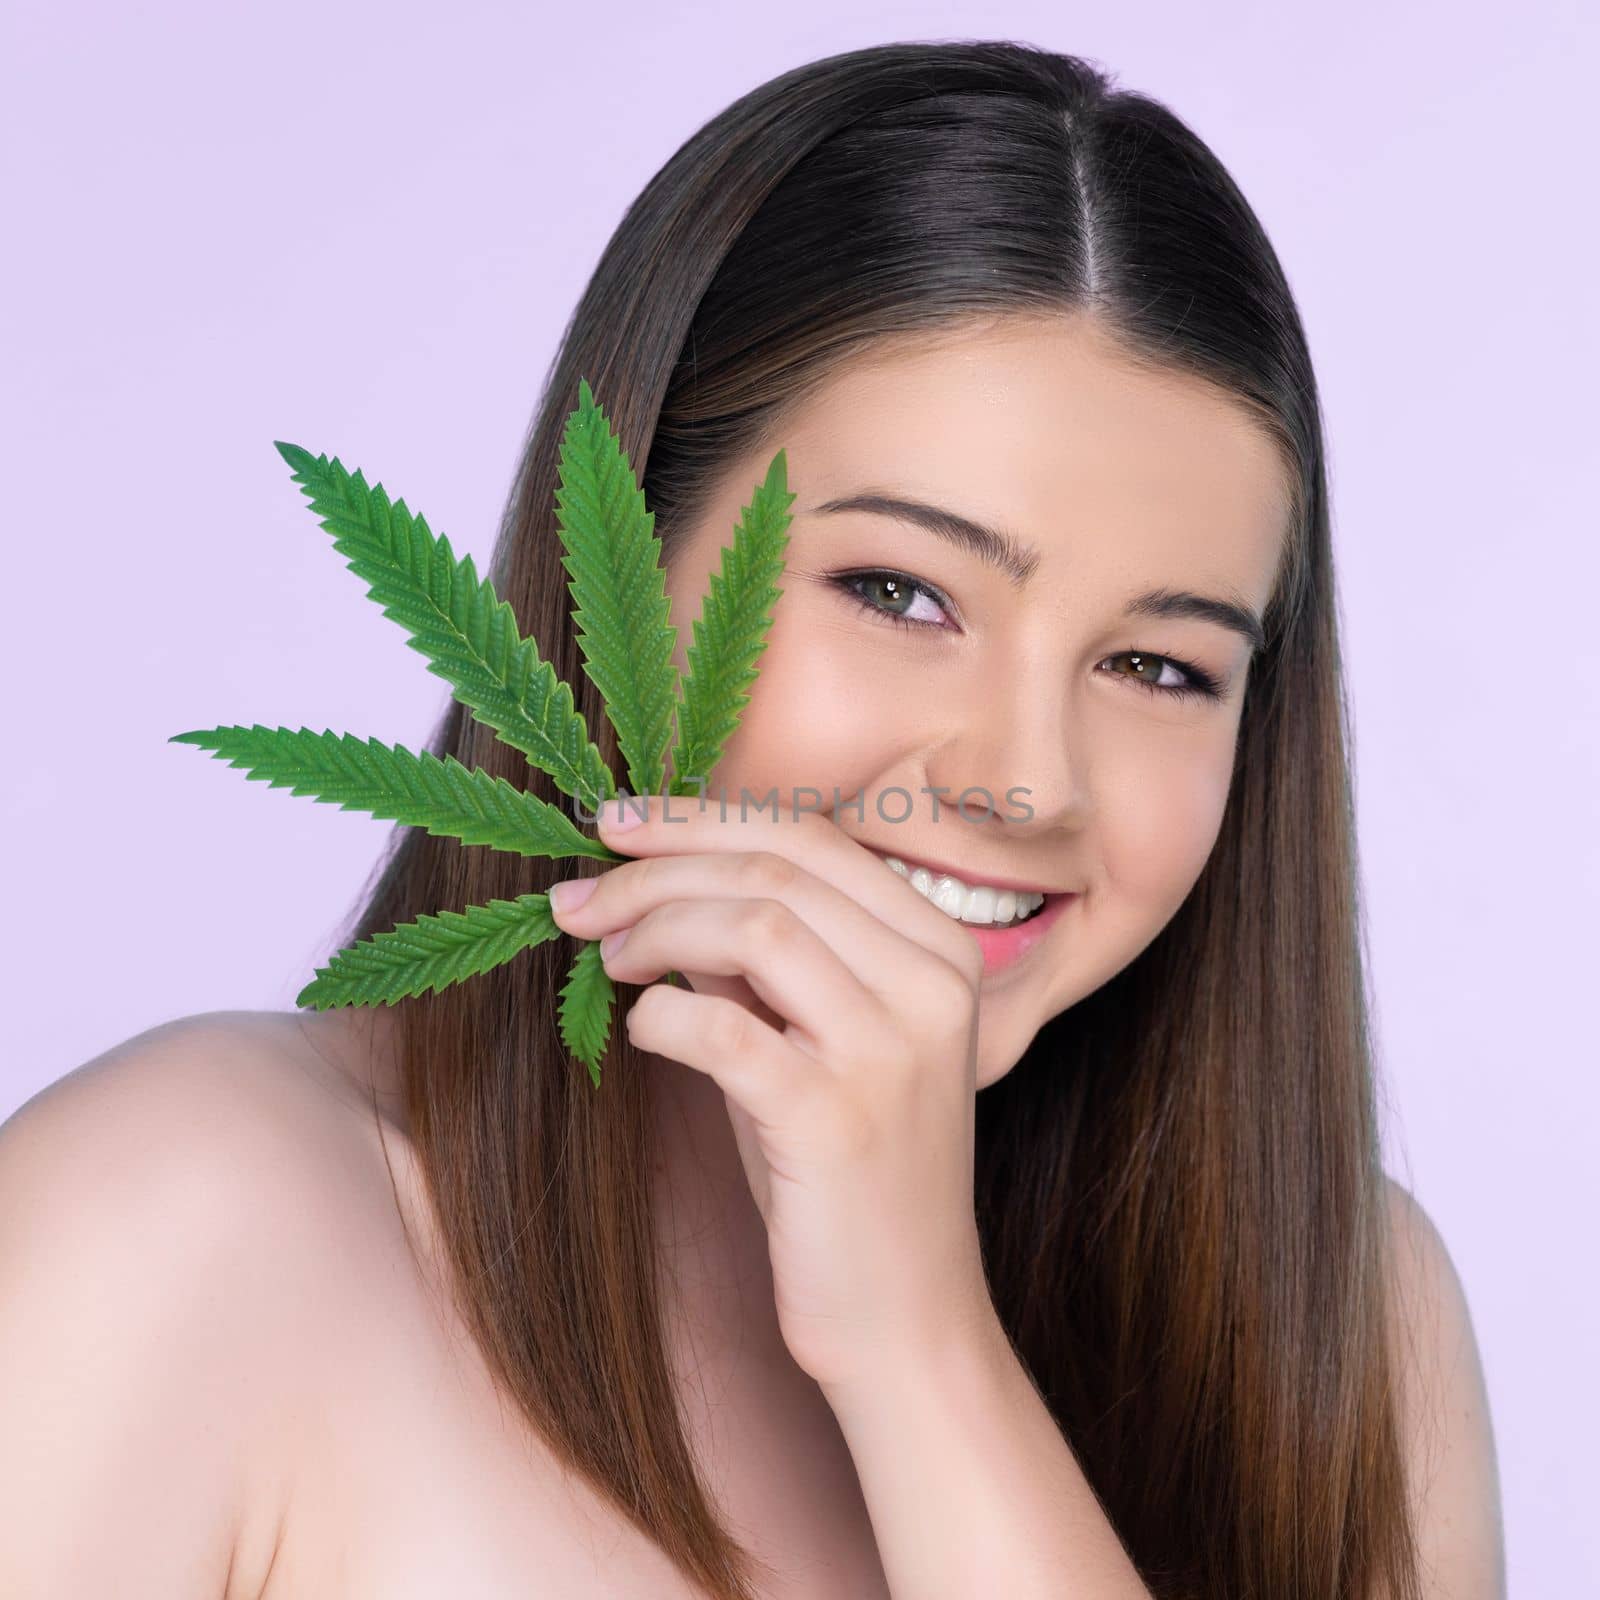 Closeup portrait of charming girl with fresh skin holding cannabis leaf. by biancoblue